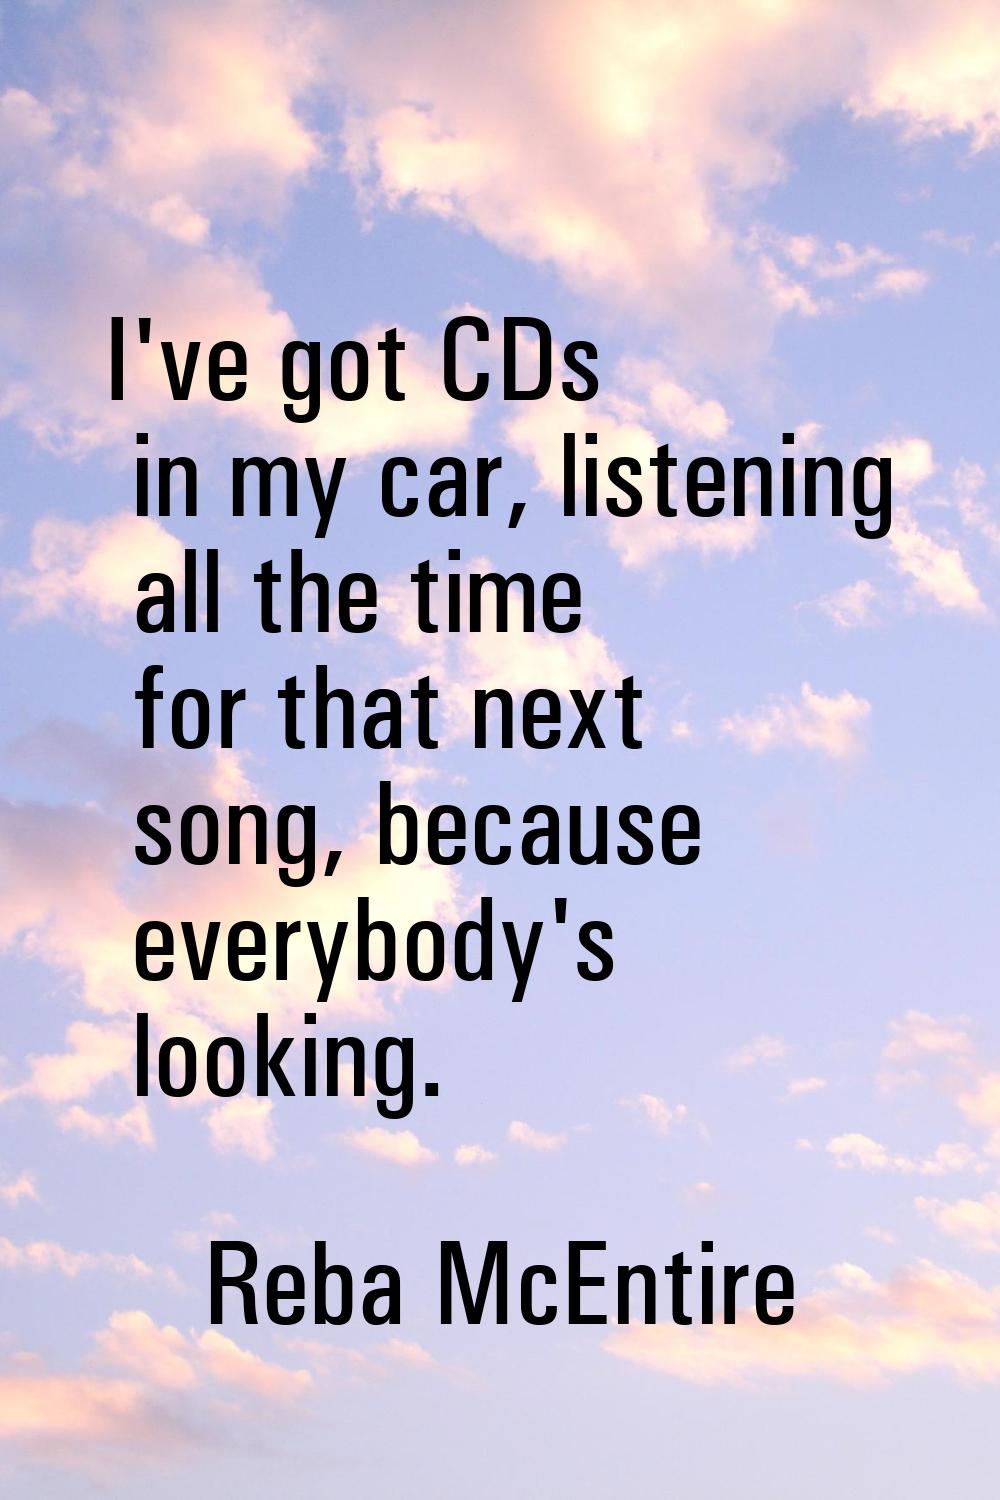 I've got CDs in my car, listening all the time for that next song, because everybody's looking.